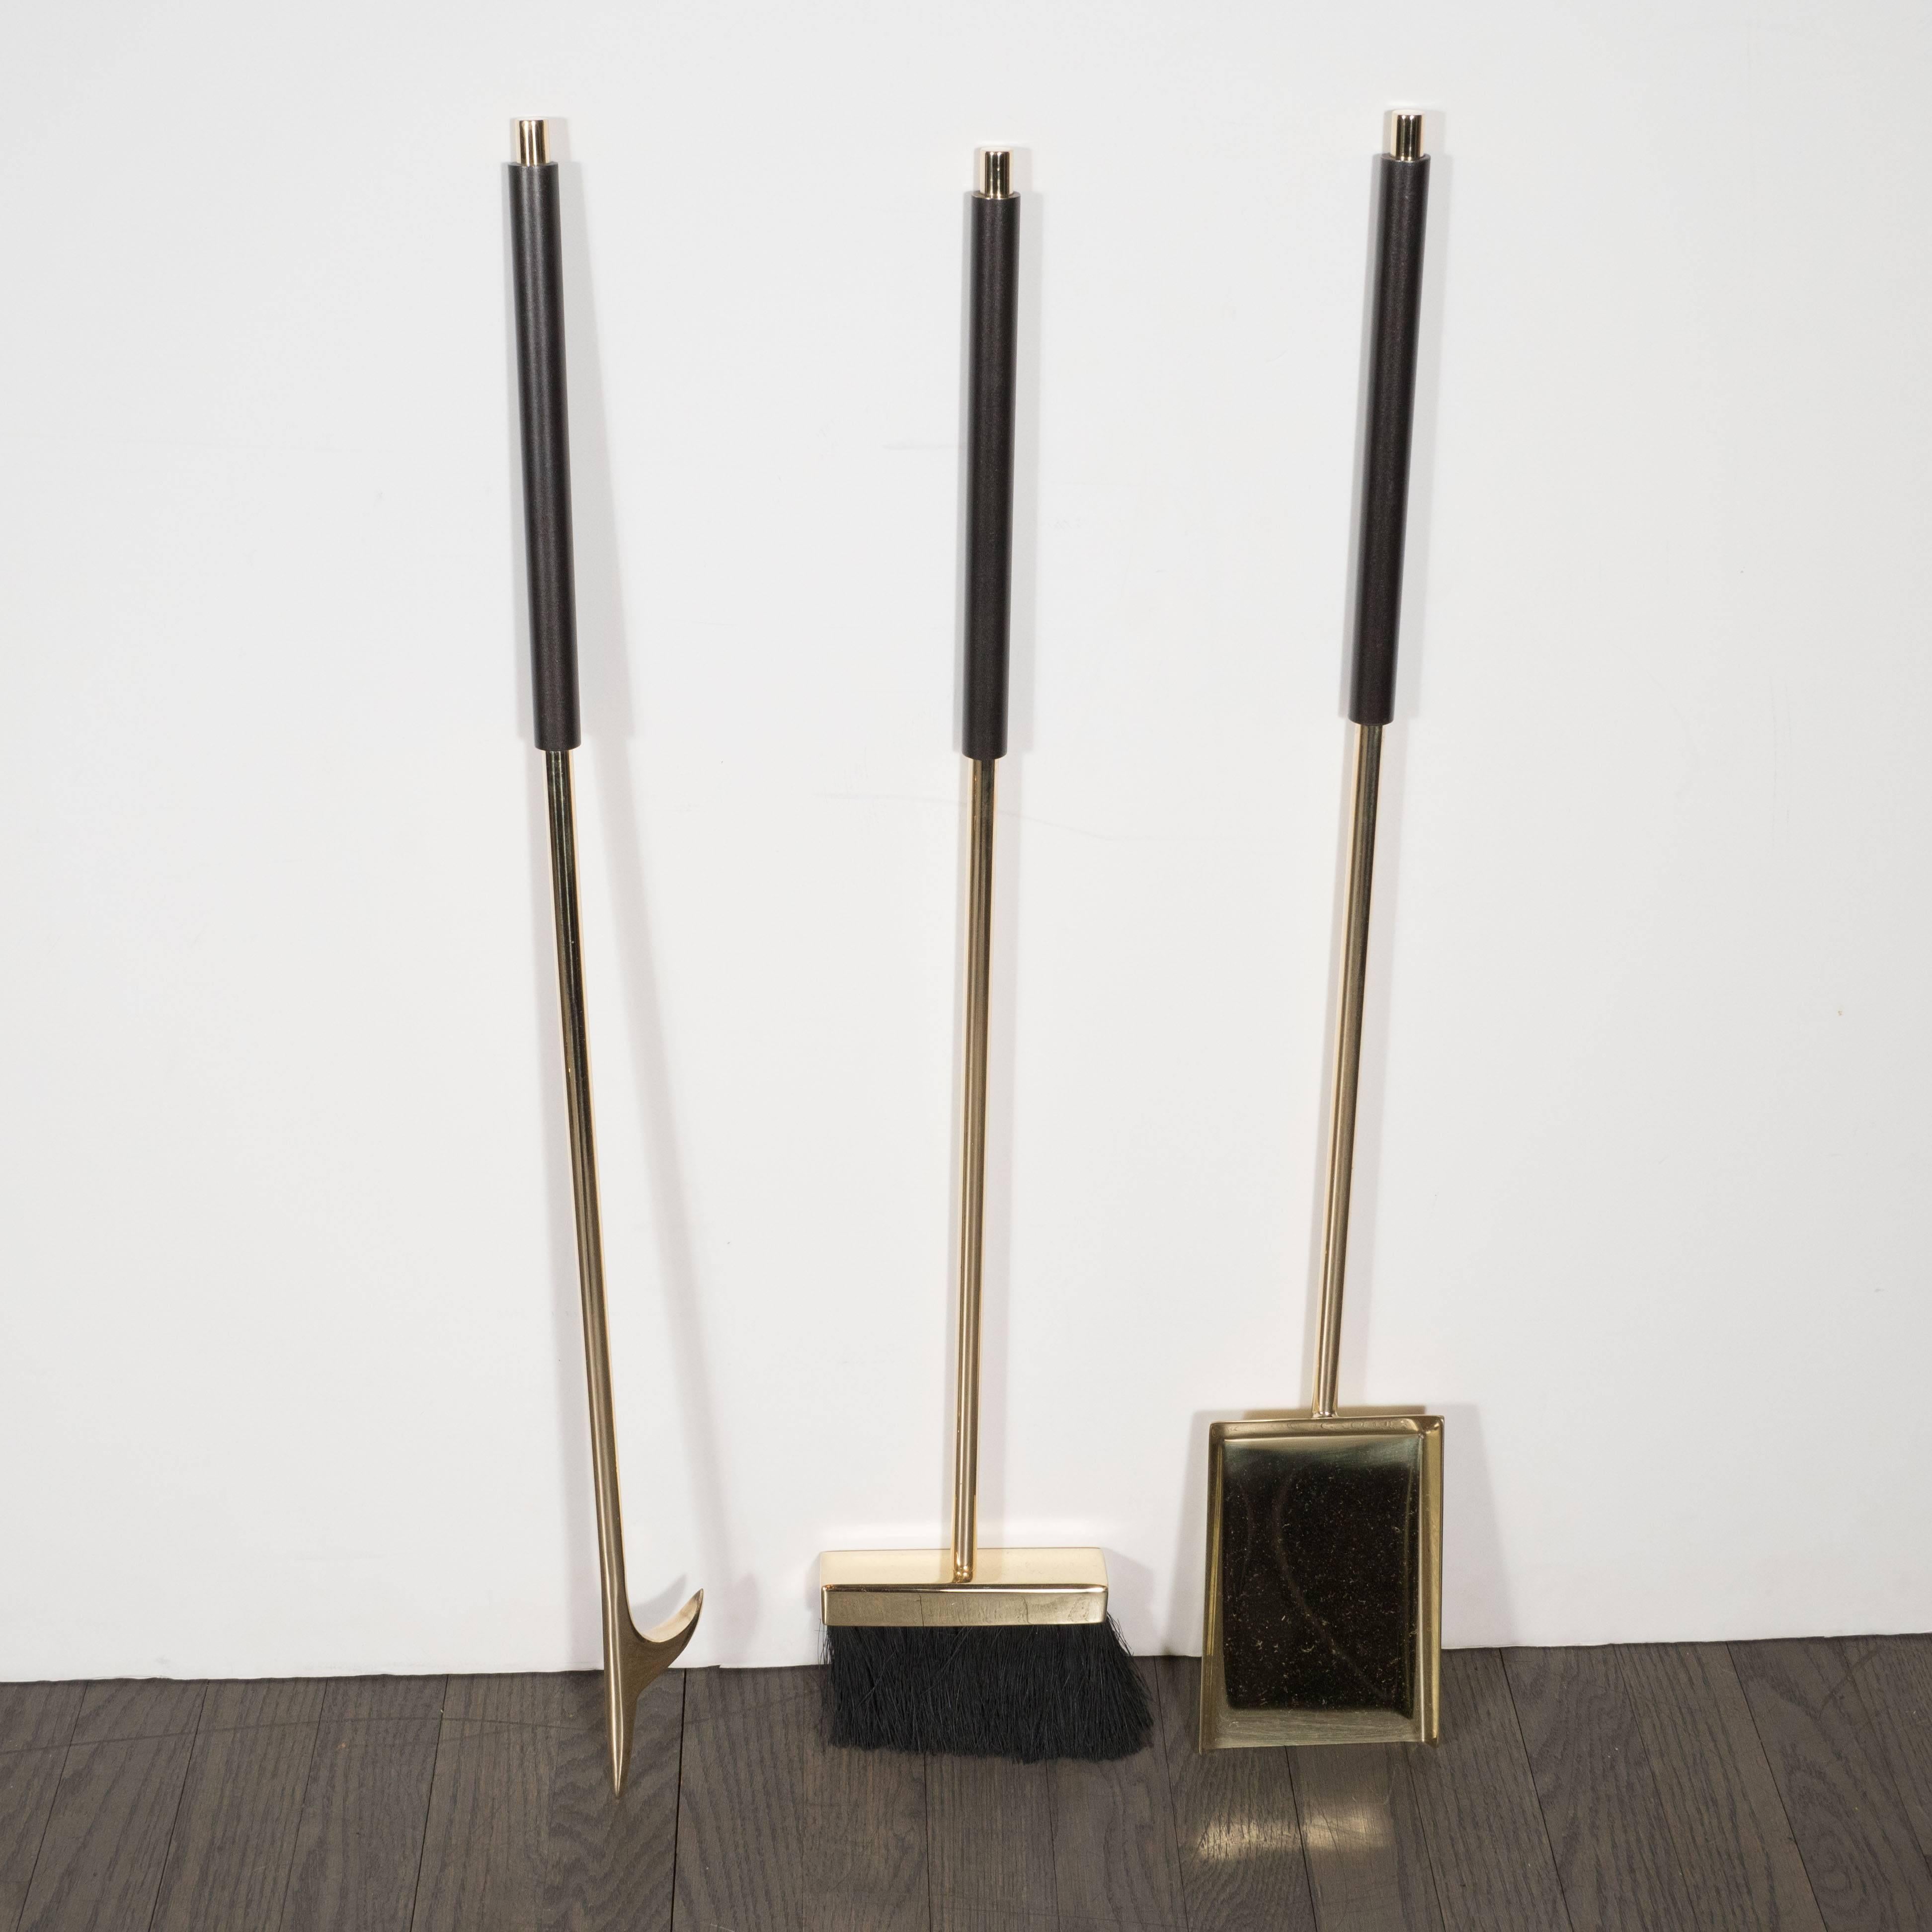 This refined and luxurious custom fireplace tool set includes stand, shovel, brush, poker and tongs realized in lustrous polished brass. The fire tool pieces offer oil rubbed bronze handles with lustrous brass ends. This is not only an incredibly